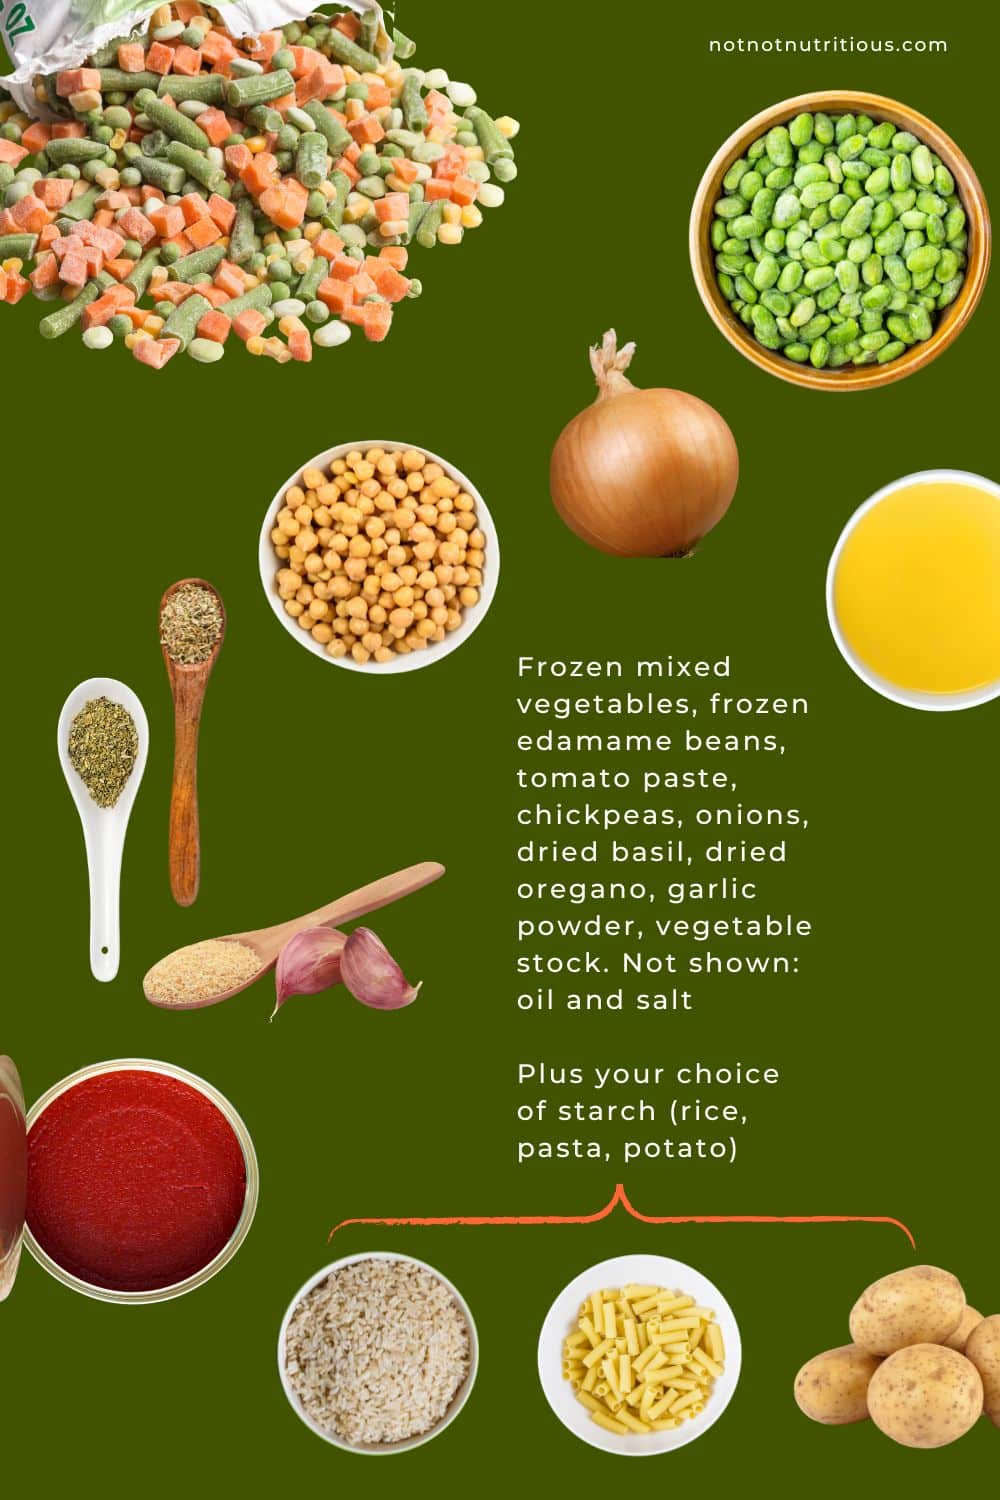 Ingredients for Hearty Tomato Vegetable Soup, showing frozen vegetables, frozen edamame beans, chickpeas, onion, vegetable broth, dried basil, dried oregano, garlic powder, tomato paste. Pick a starch: potato, rice pasta.